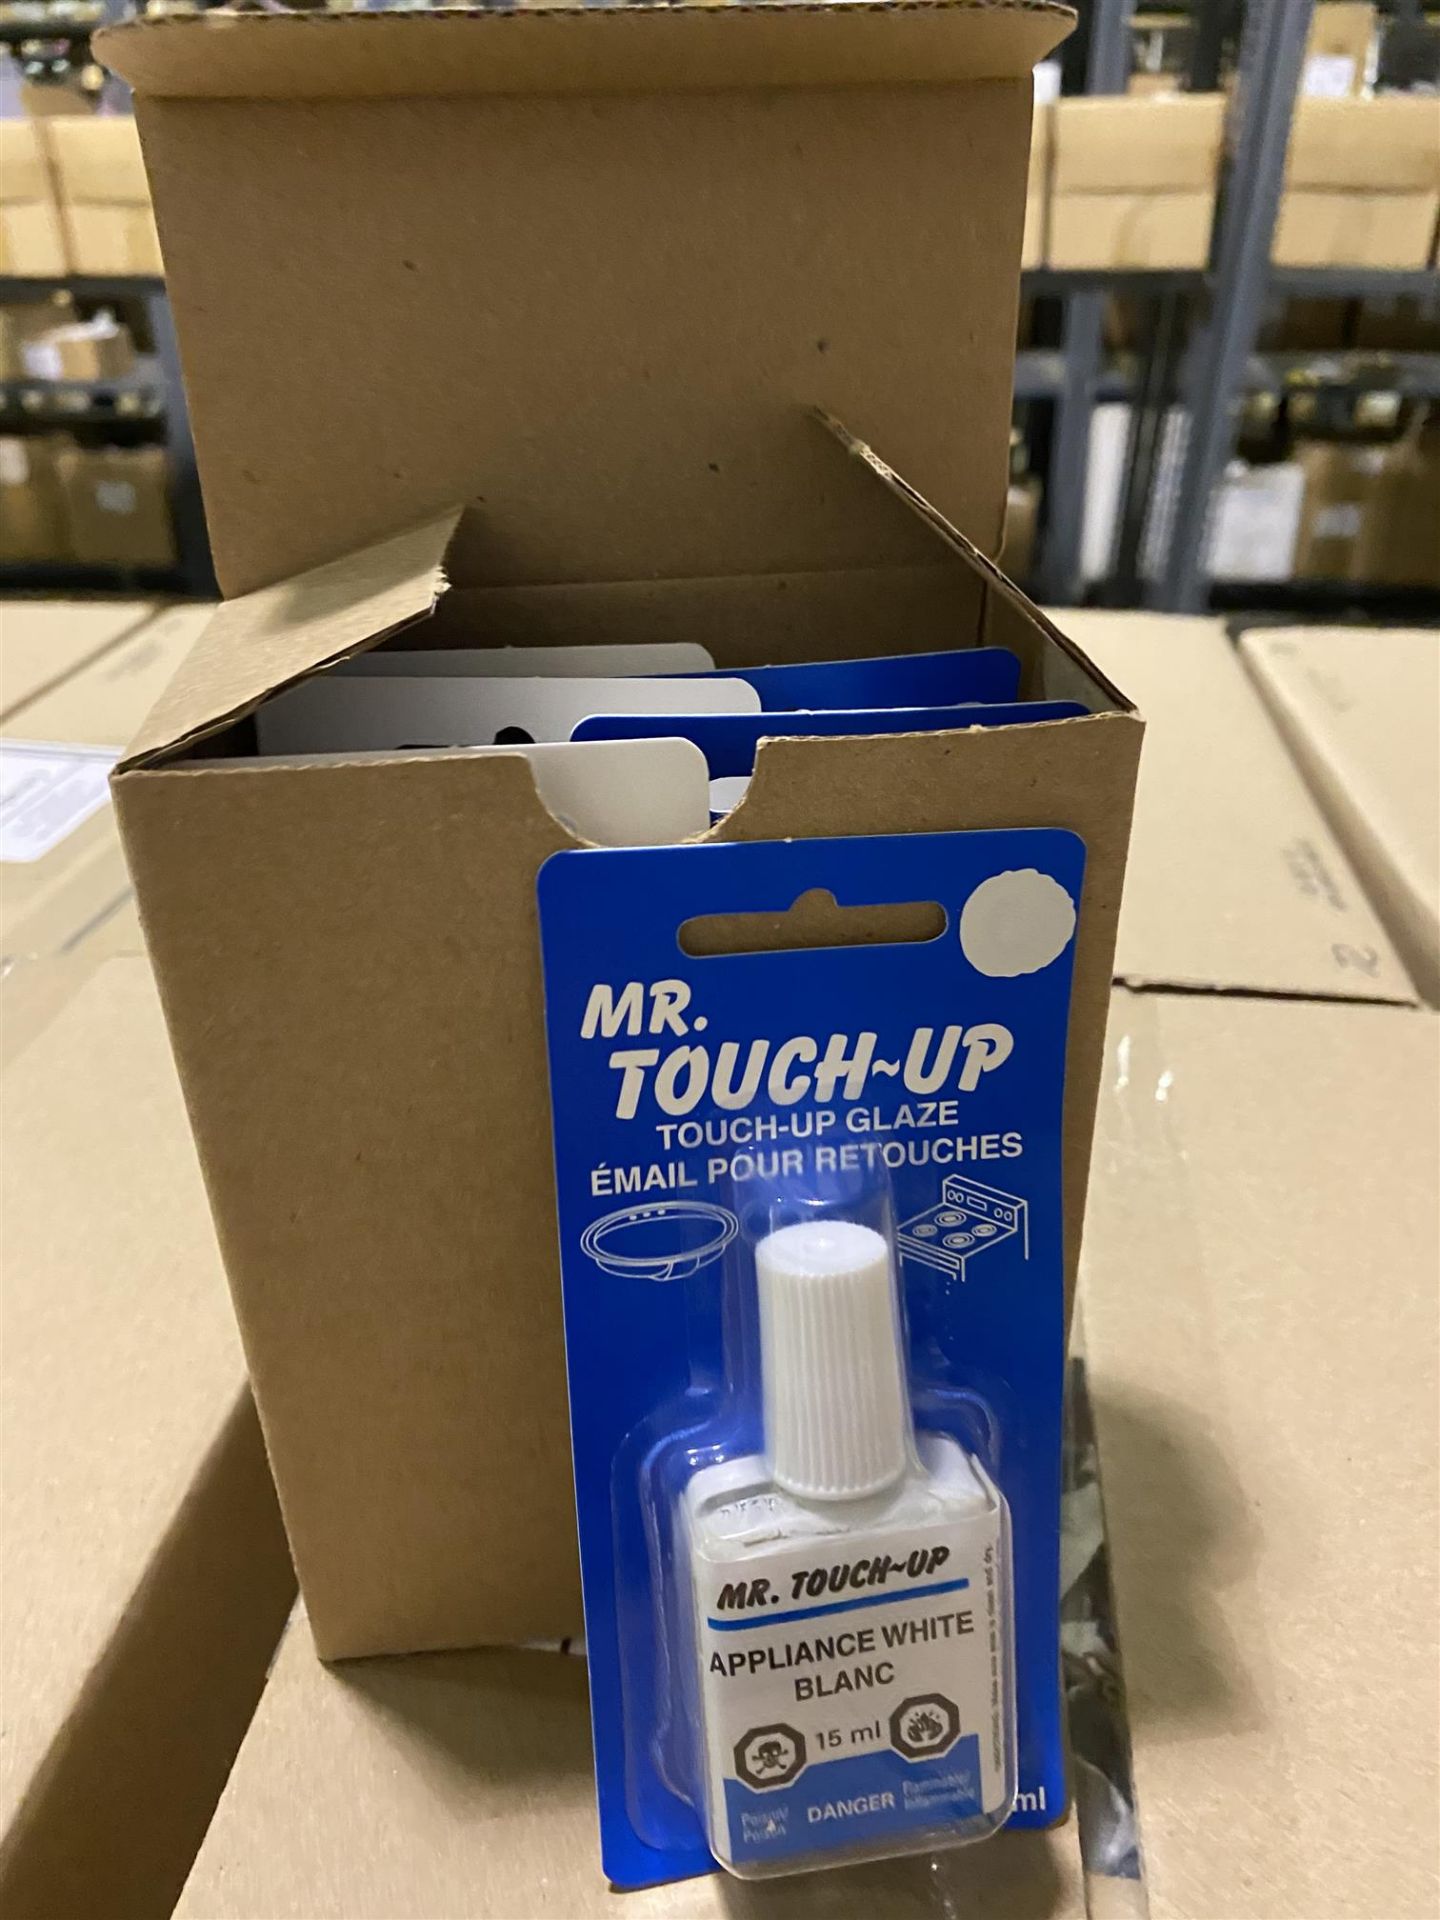 MR. TOUCH UP - TOUCH UP GLAZE - APPLIANCE WHITE - 15ML - 72PCS - Image 2 of 2